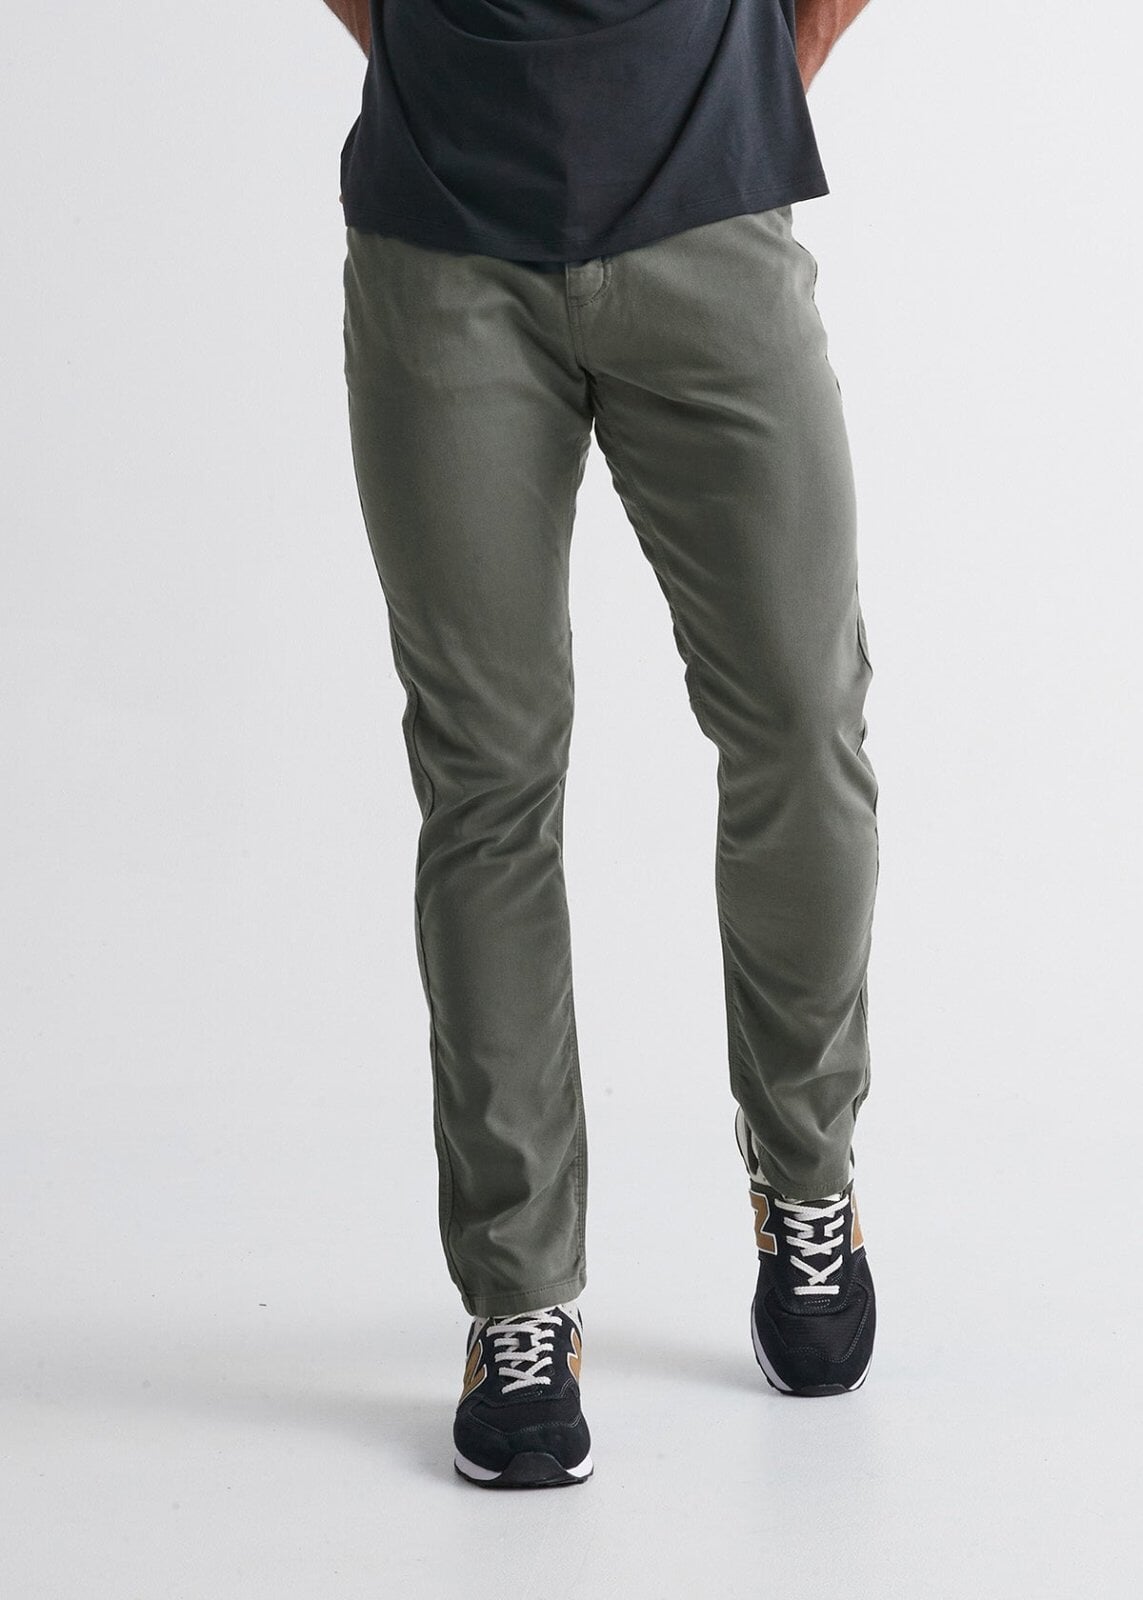 Duer No Sweat Pant Relaxed Men's